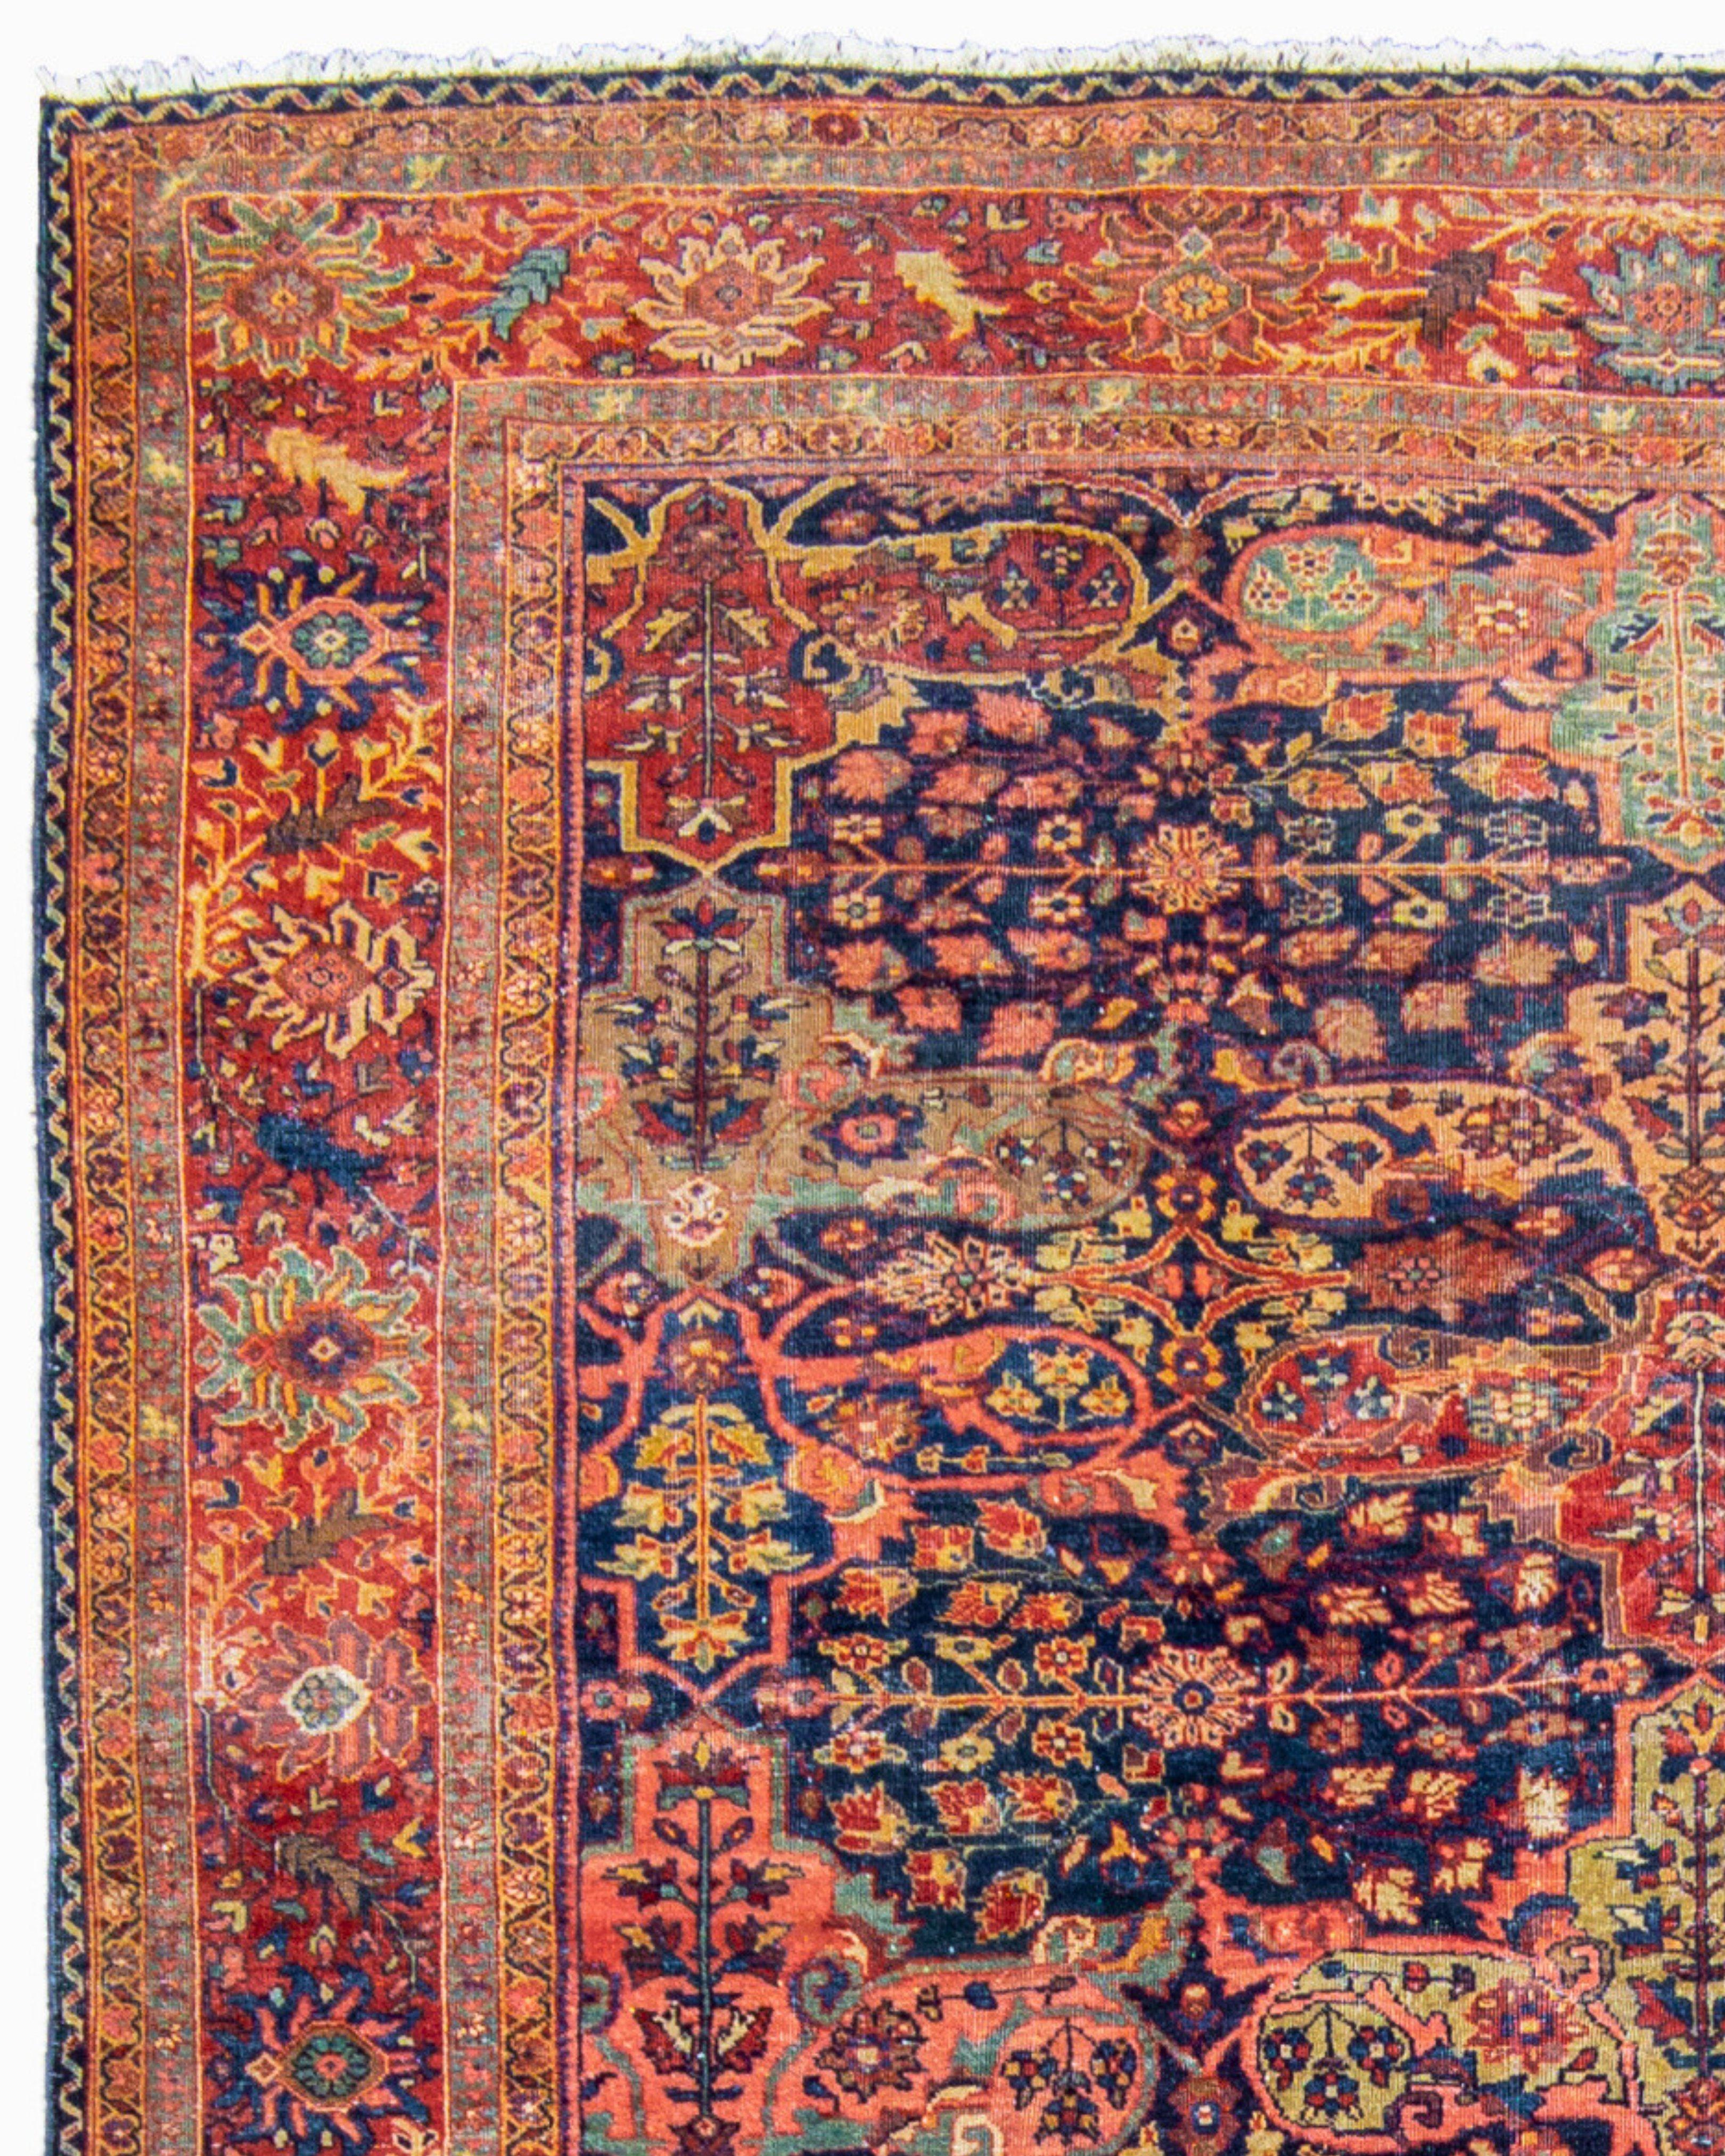 Hand-Woven Antique Persian Fereghan Carpet, c. 1900 For Sale